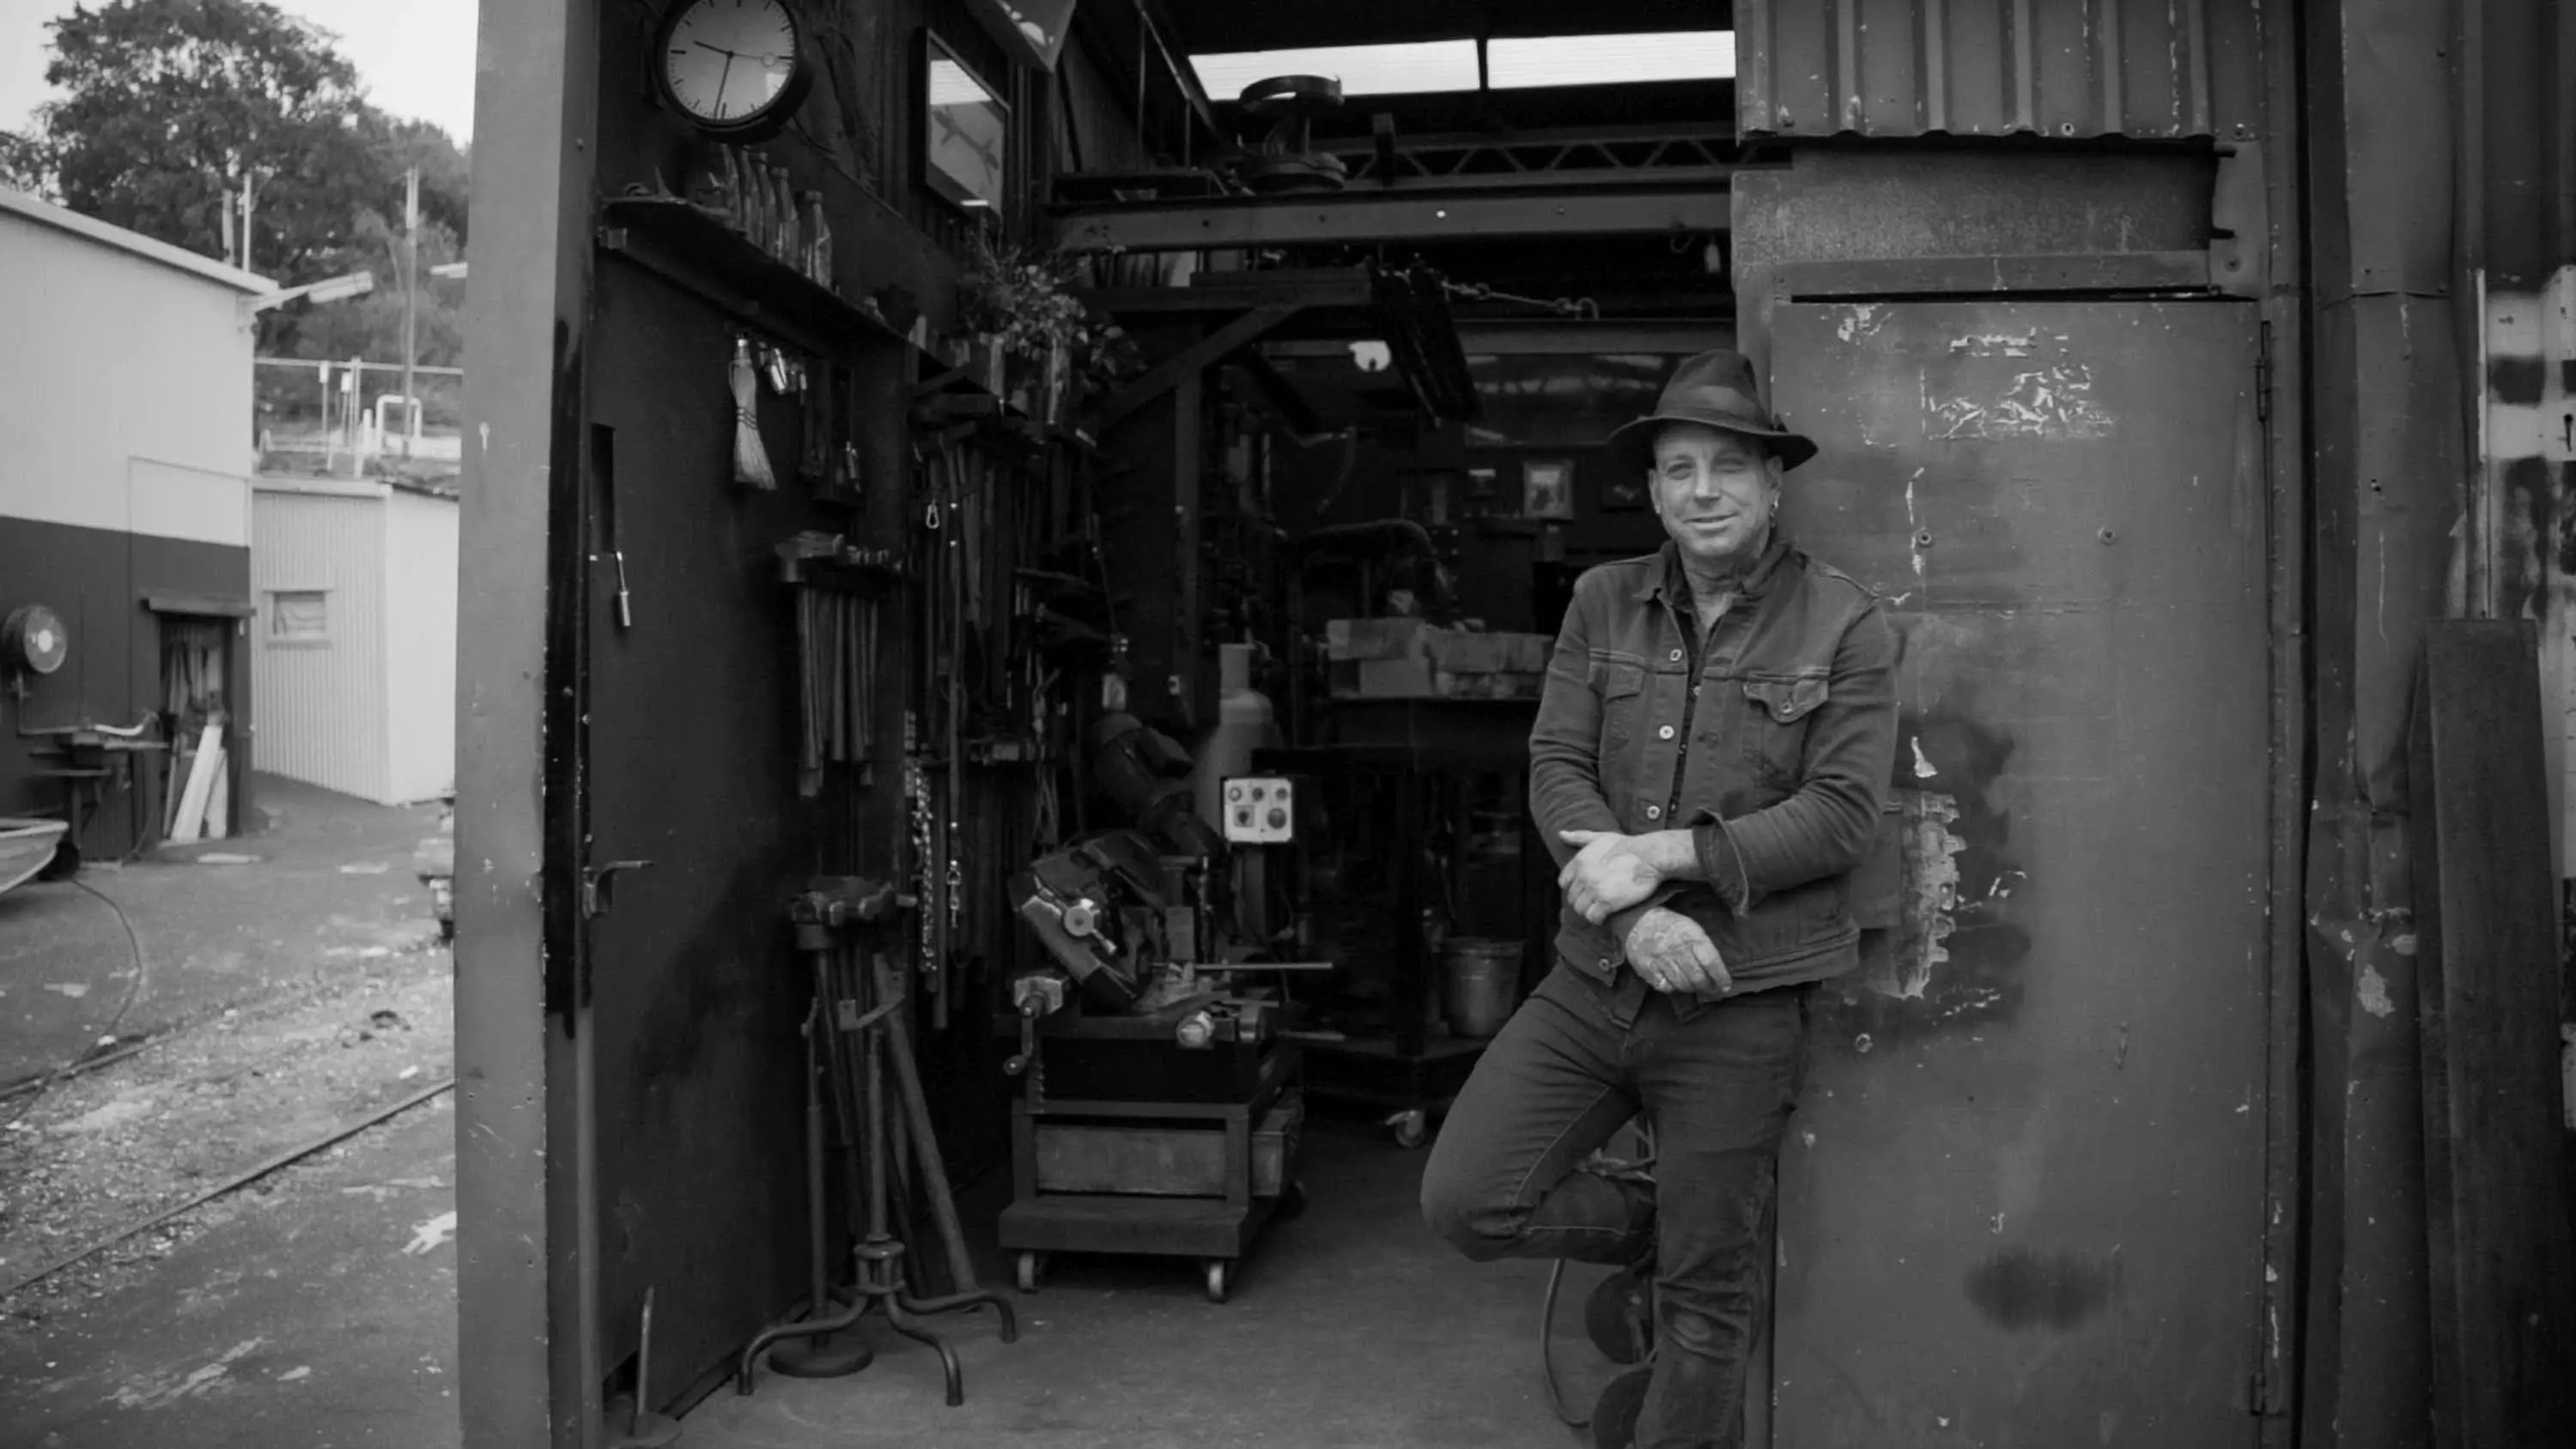 A man wearing a hat, denim jacket, black jeans and boats leans against the open door of a metal workshop.